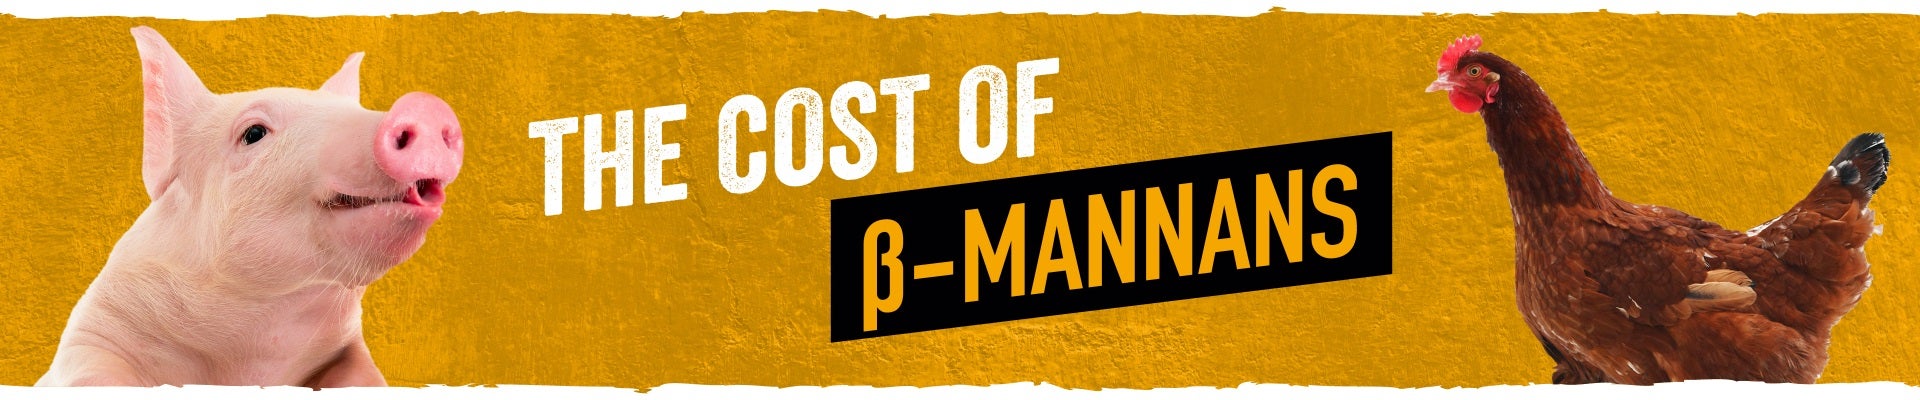 The cost of beta-mannans